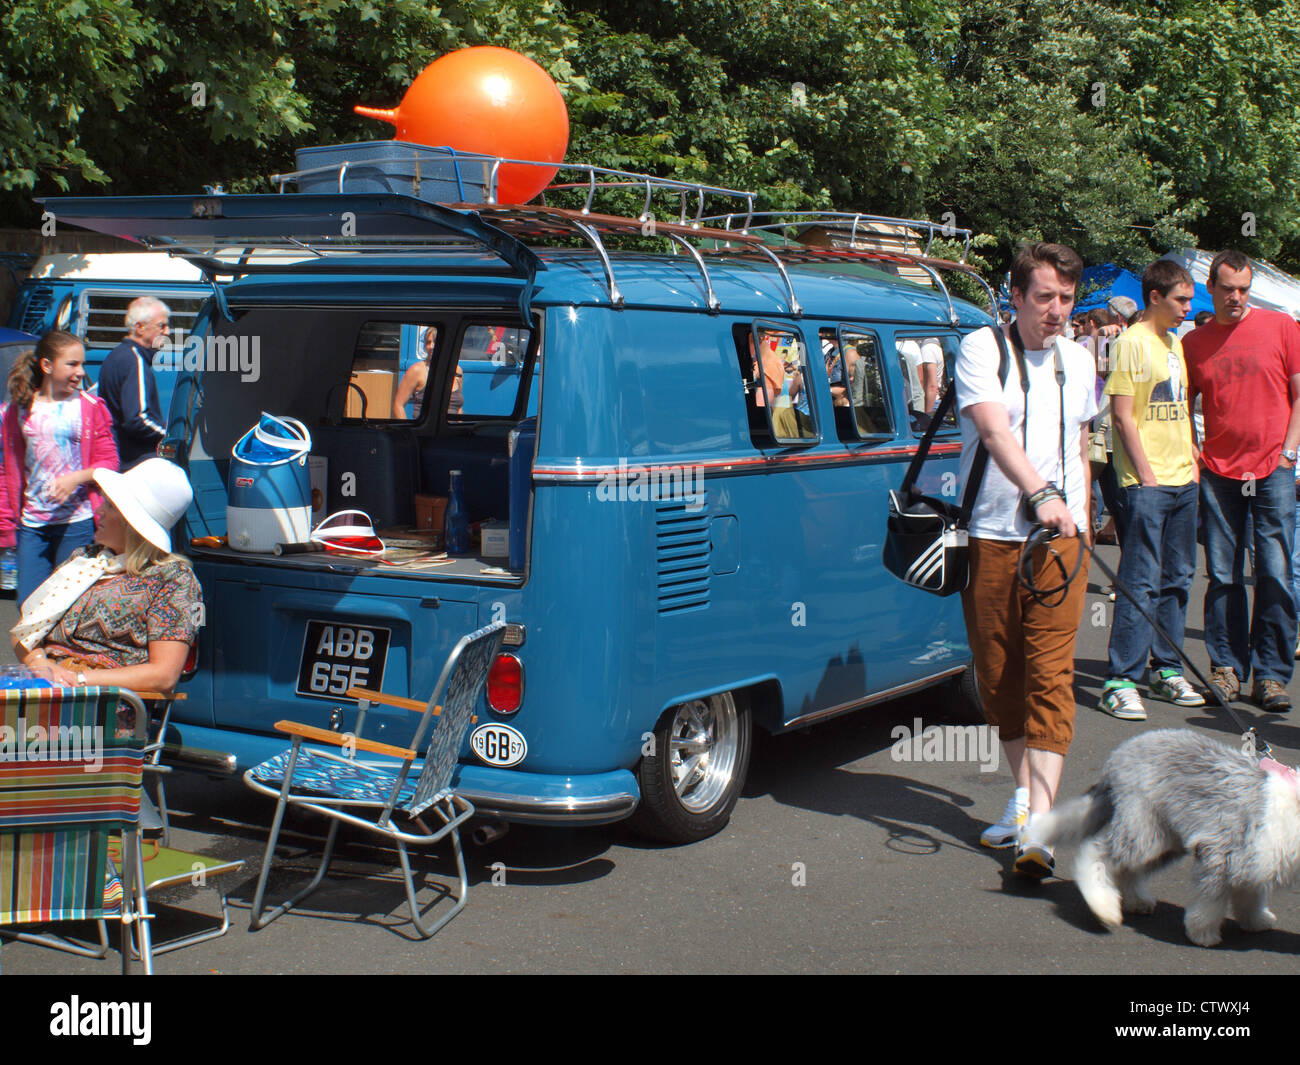 Crowds of people gathering at a vintage Volkswagen classic car and van festival in Northern England. Stock Photo